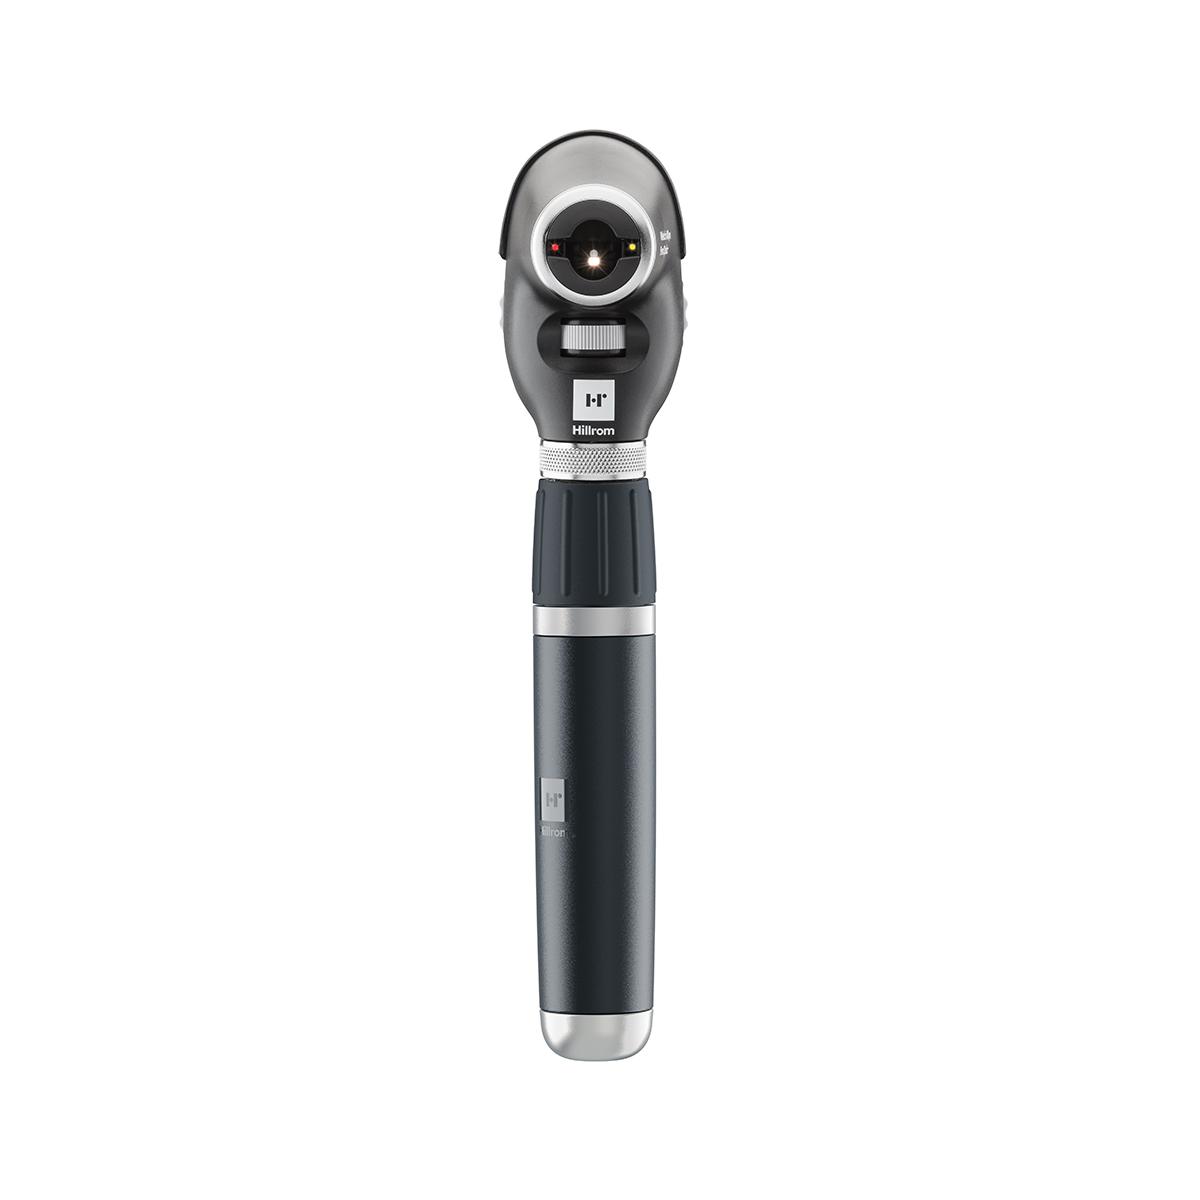 Đèn soi đáy mắt  Welch Allyn (Welch Allyn PanOptic Plus LED Ophthalmoscope with Quick Eye Alignment Technology)